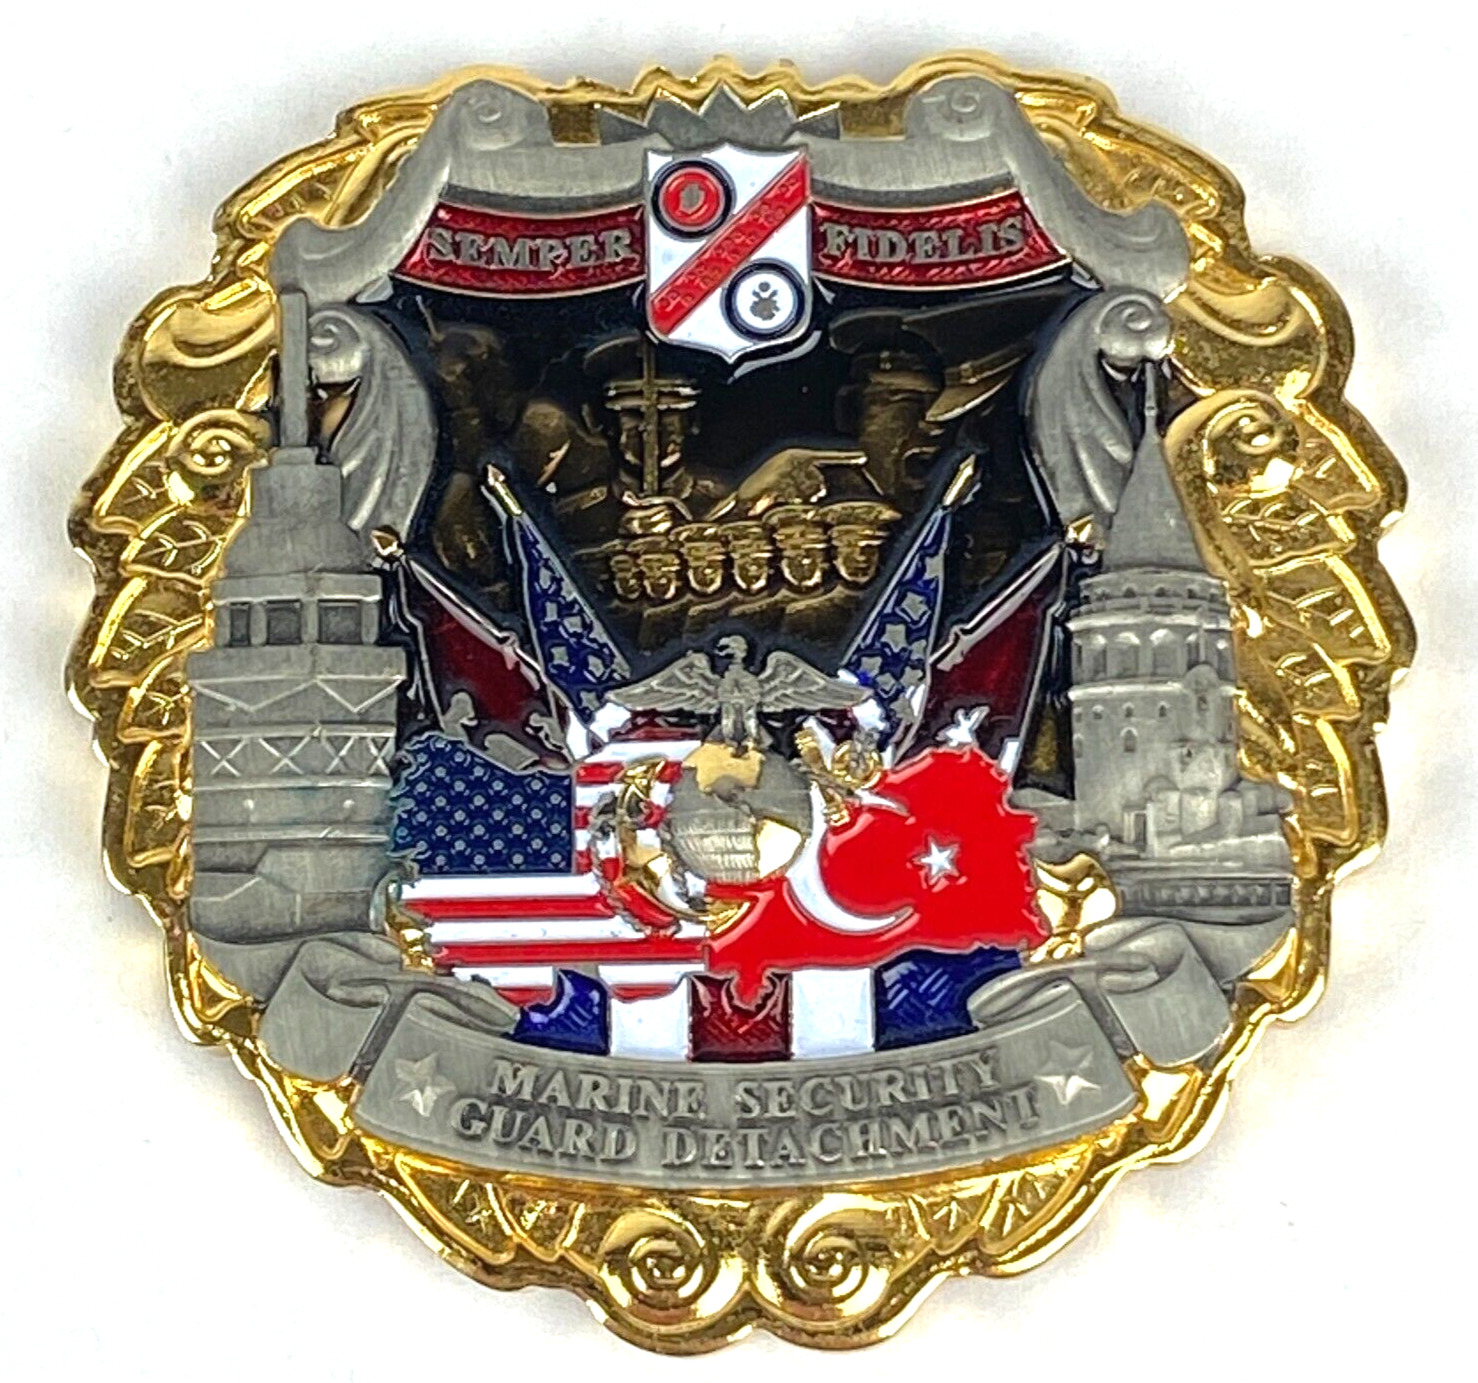 MSG Det Marine Security Guard Detachment Istanbul Turkey American Consulate Coin